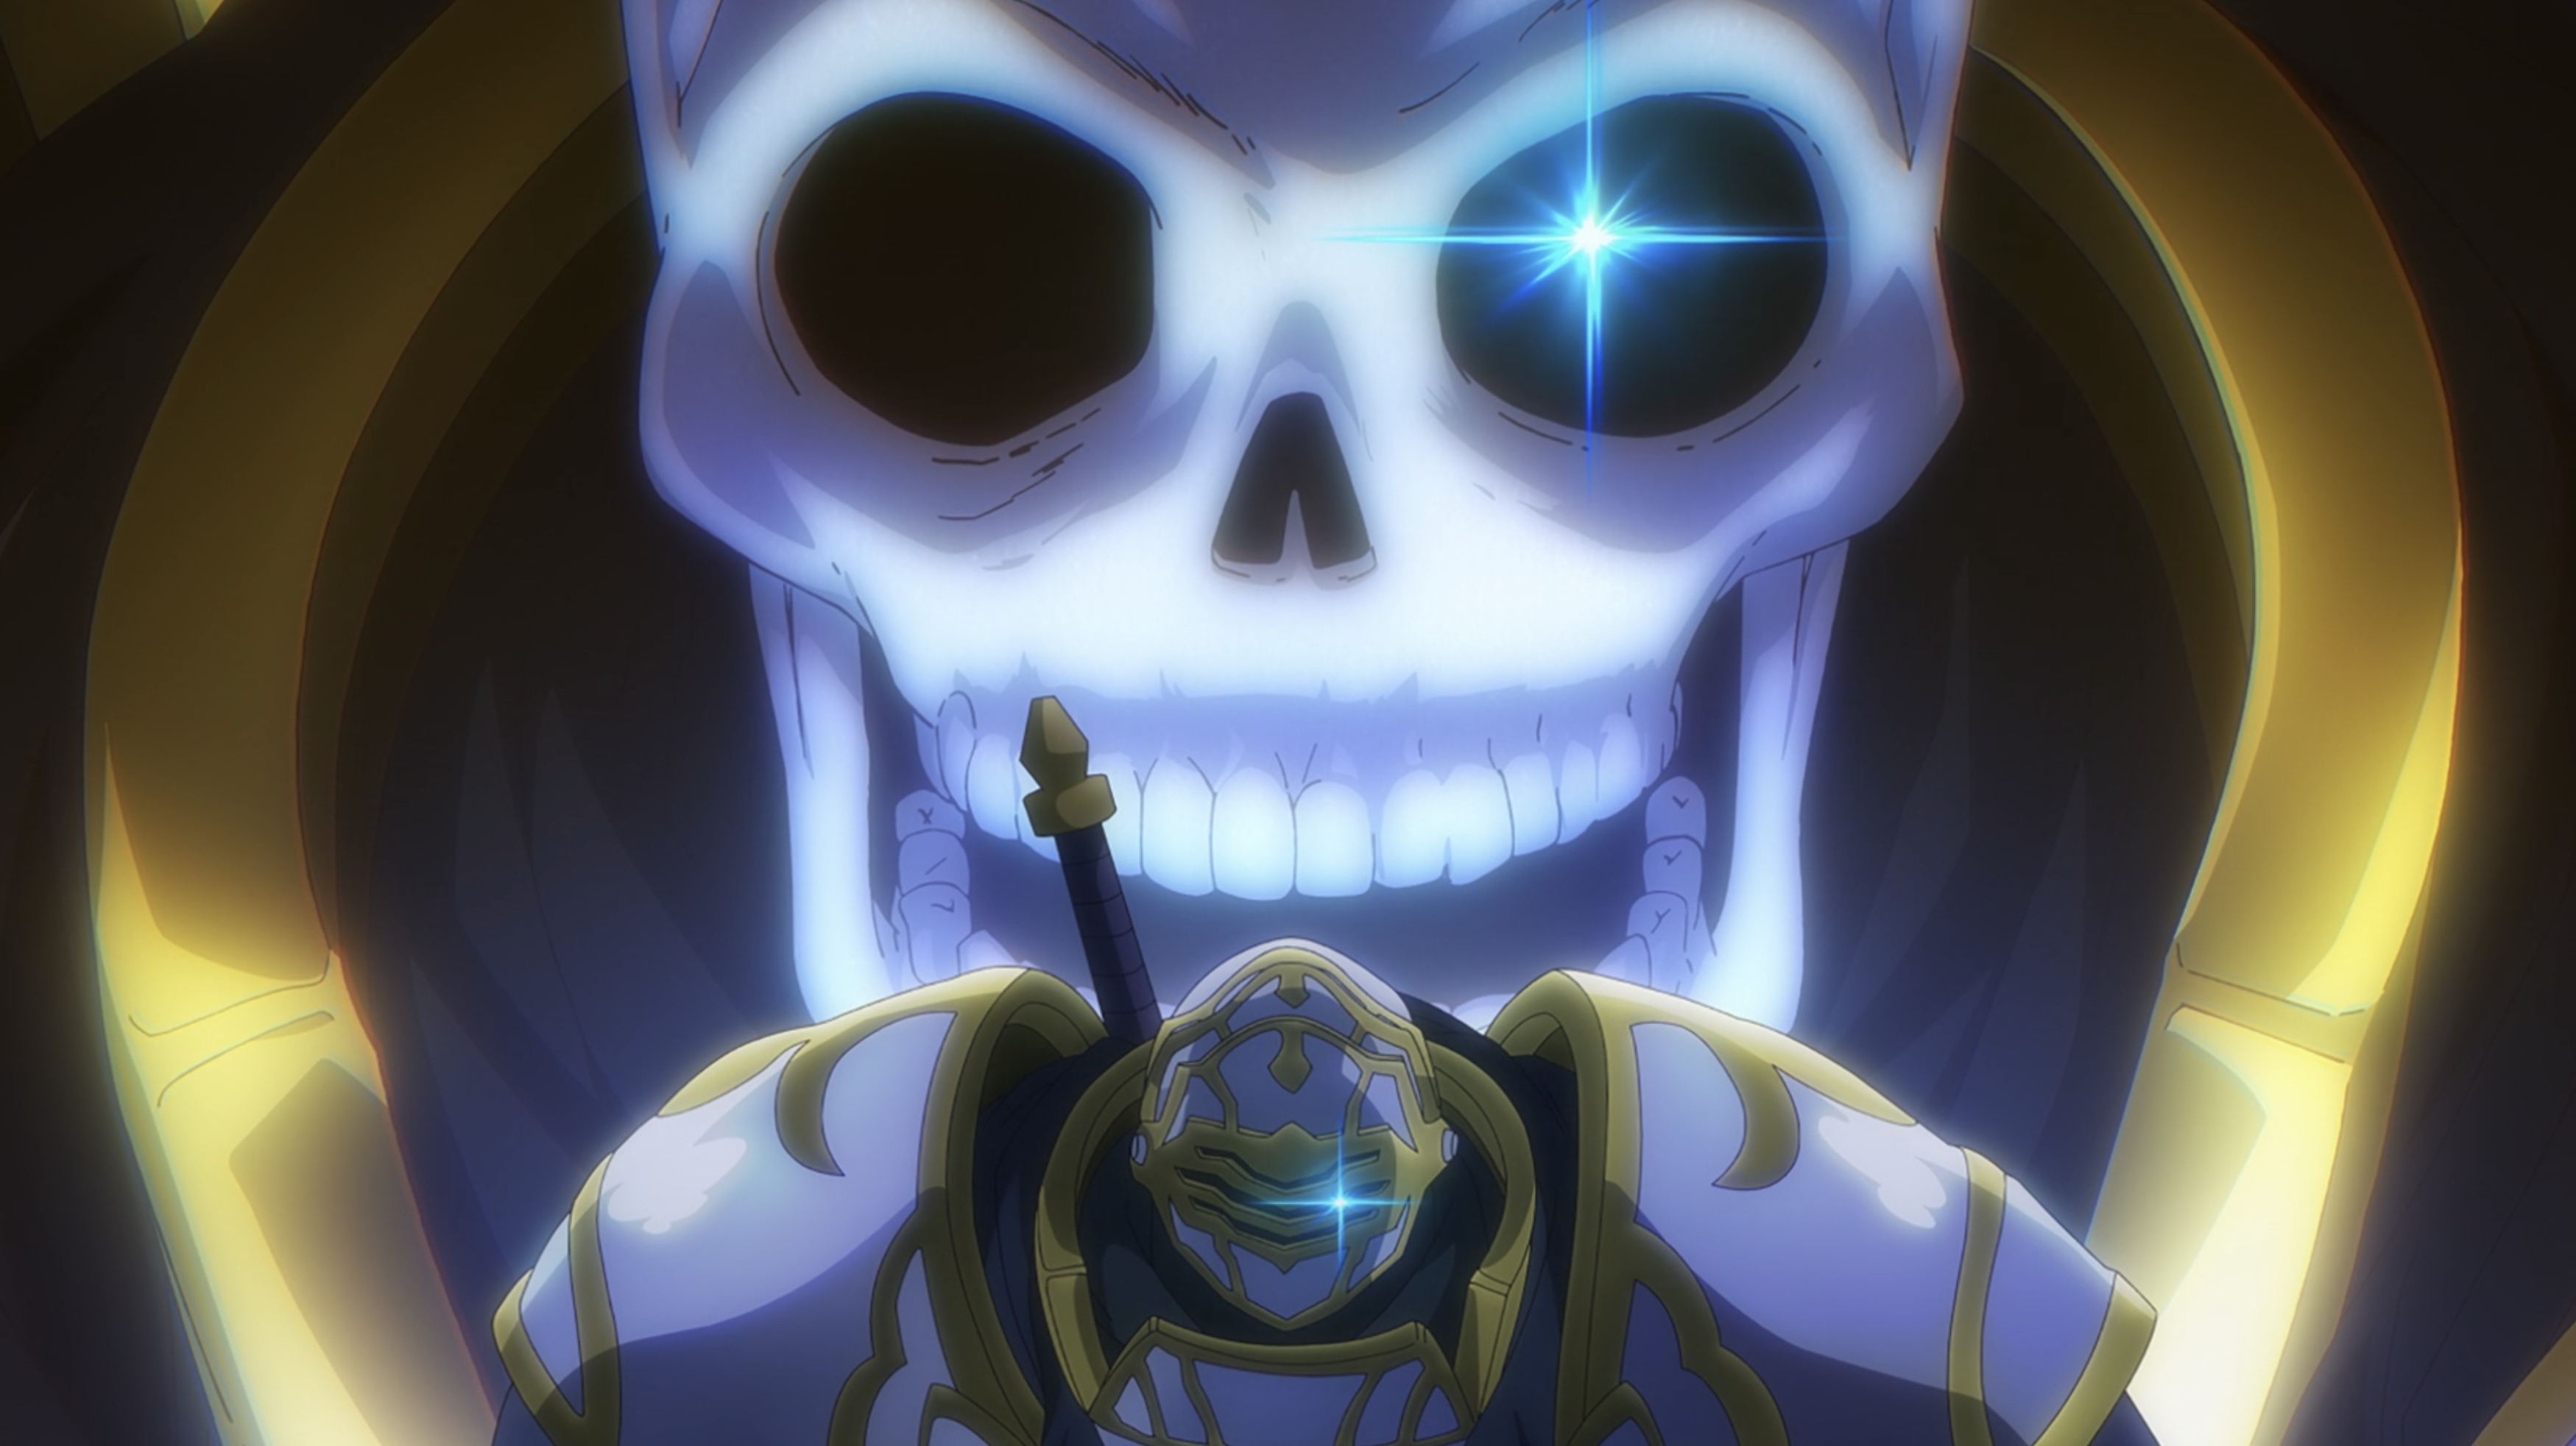 Skeleton Knight in Another World release Date confirmed – phinix – Phinix  Anime